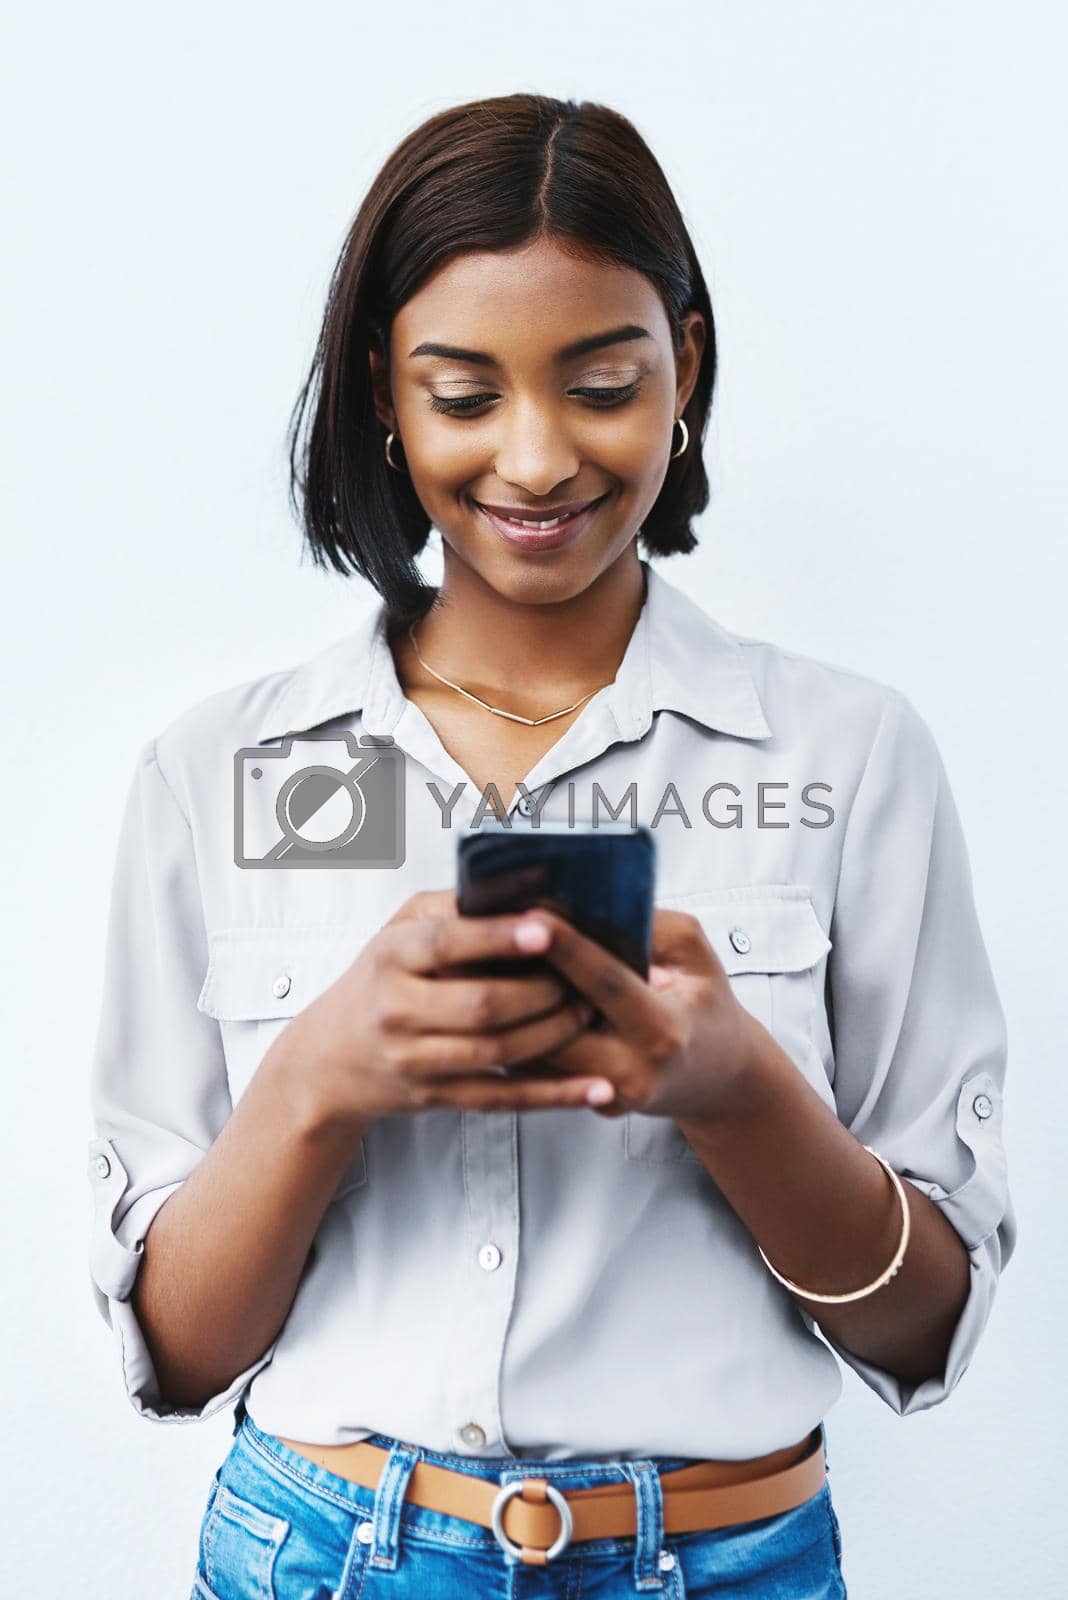 Royalty free image of When you get that message that brightens up your day. Studio shot of a young creative businesswoman using her cellphone and posing against a grey background. by YuriArcurs